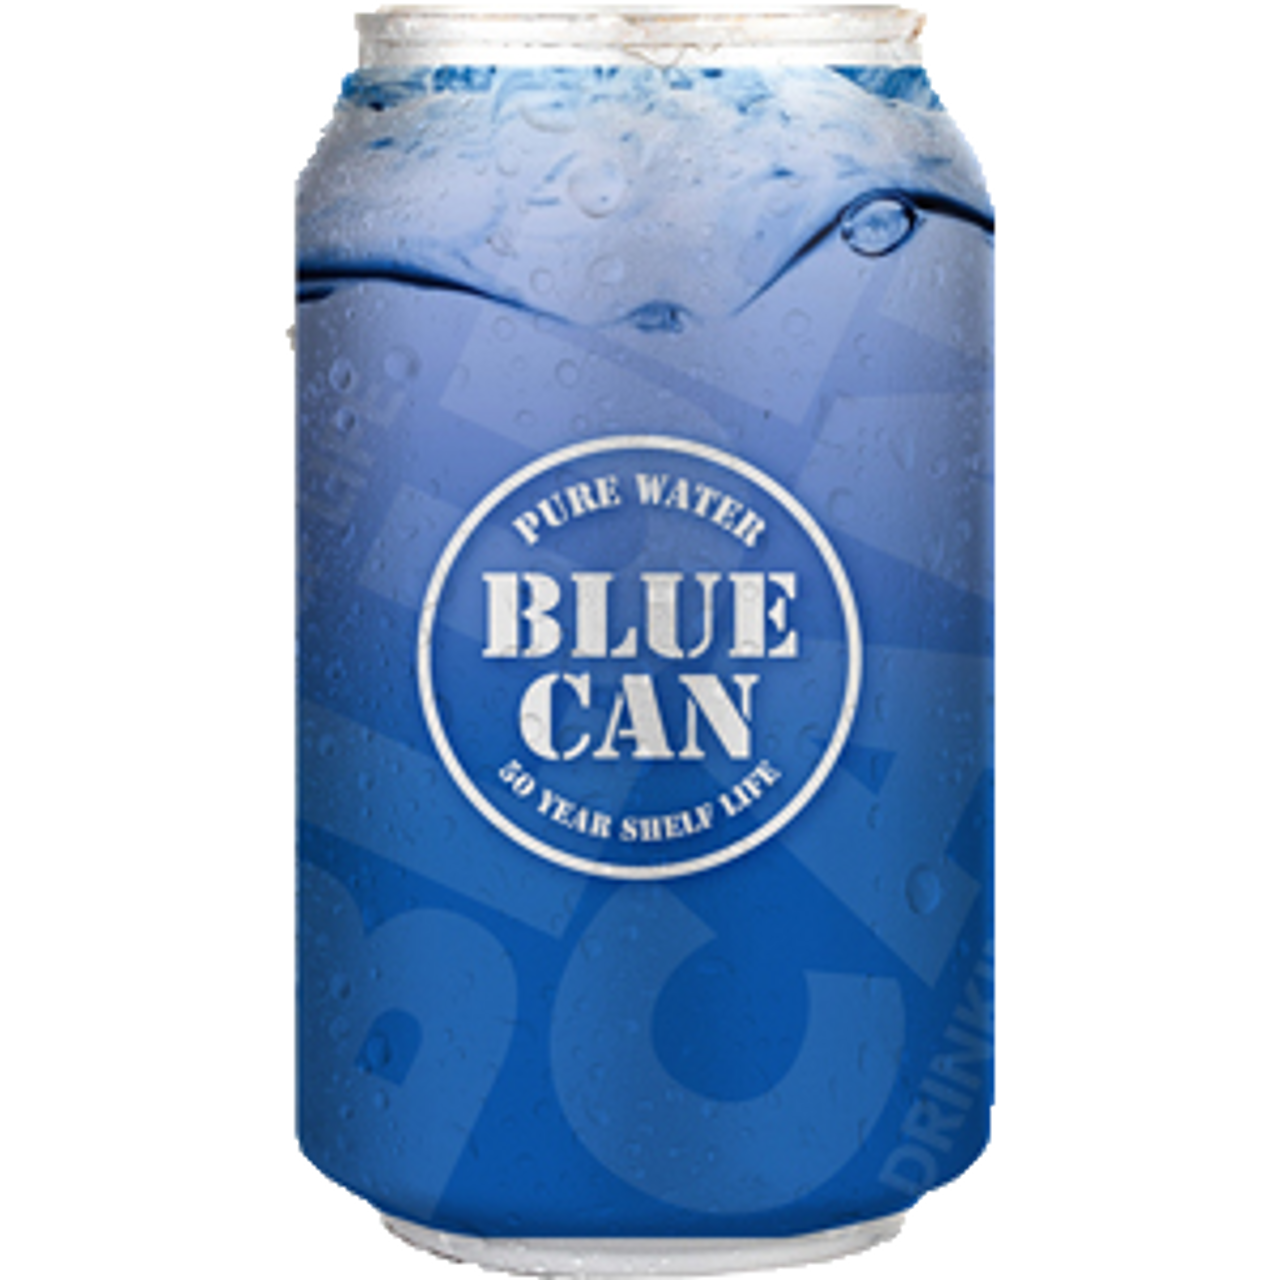 Blue Can Water  Blue Can has a shelf life of 50 years. It's ideal